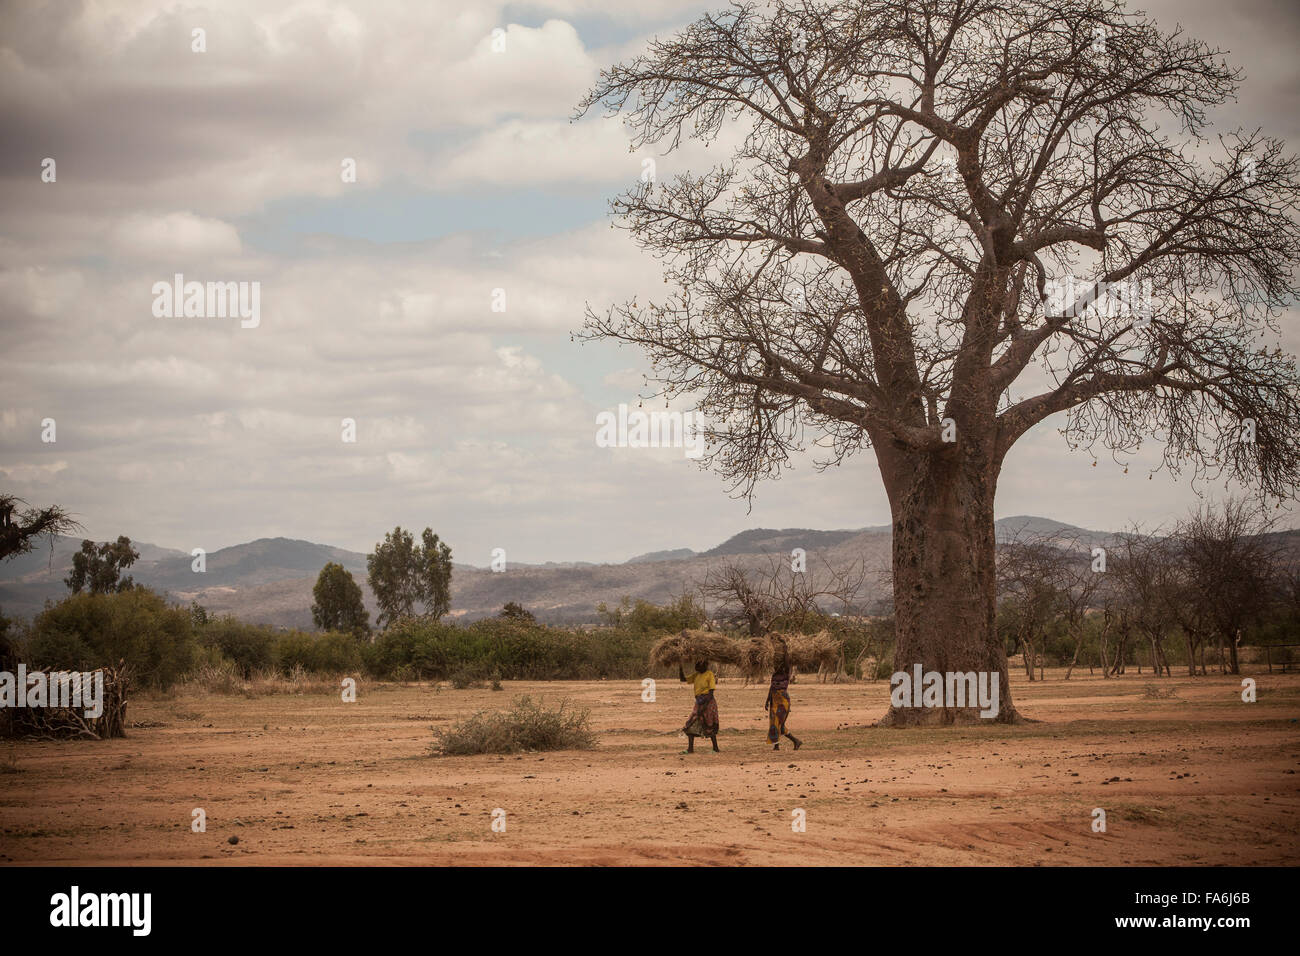 The landscape around Dodoma, Tanzania is market by rolling hills and baobab trees. Stock Photo